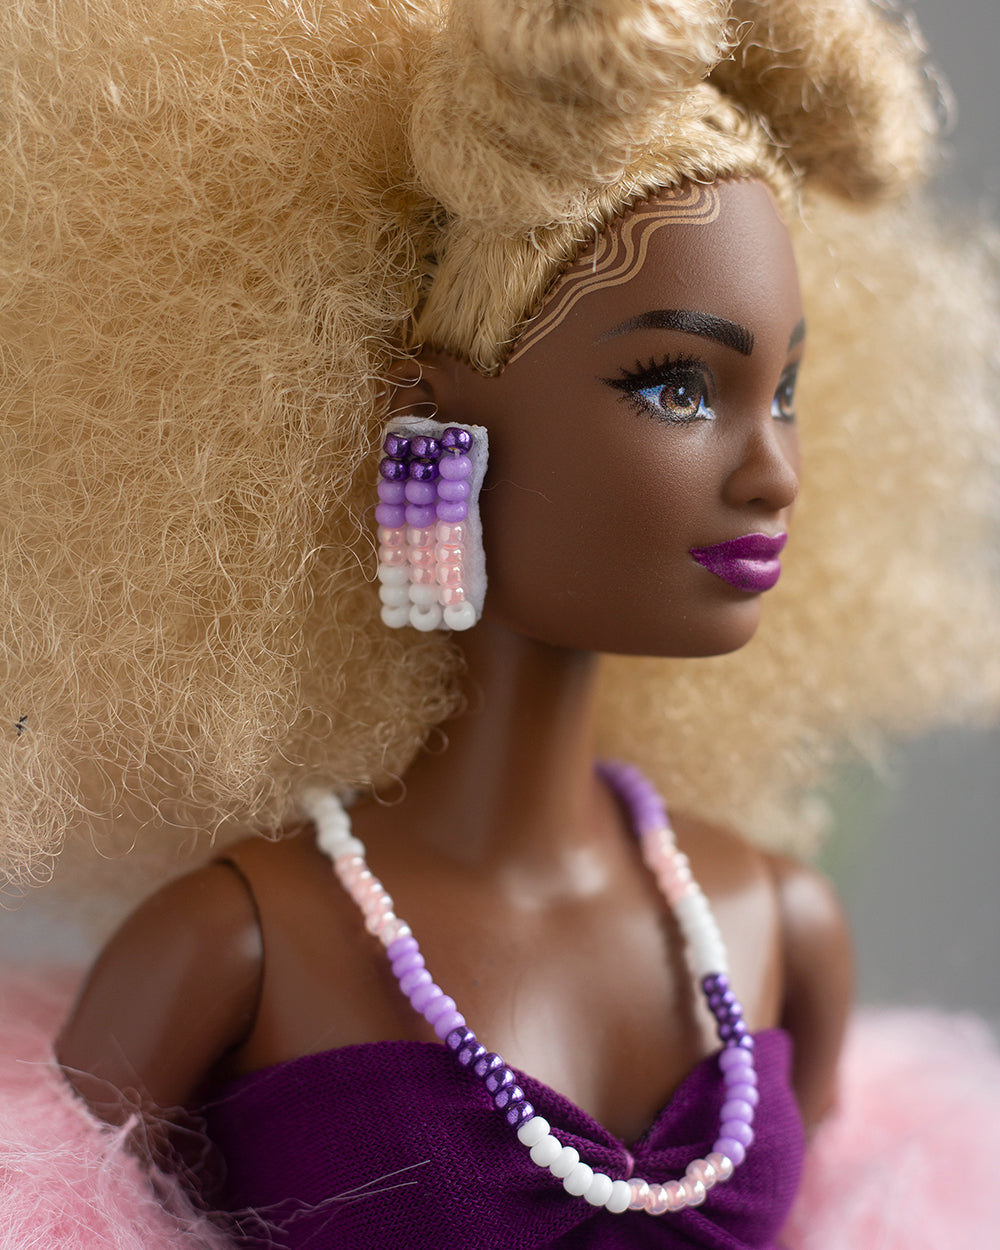 Doll #13 Afro-Indigenous Blonde